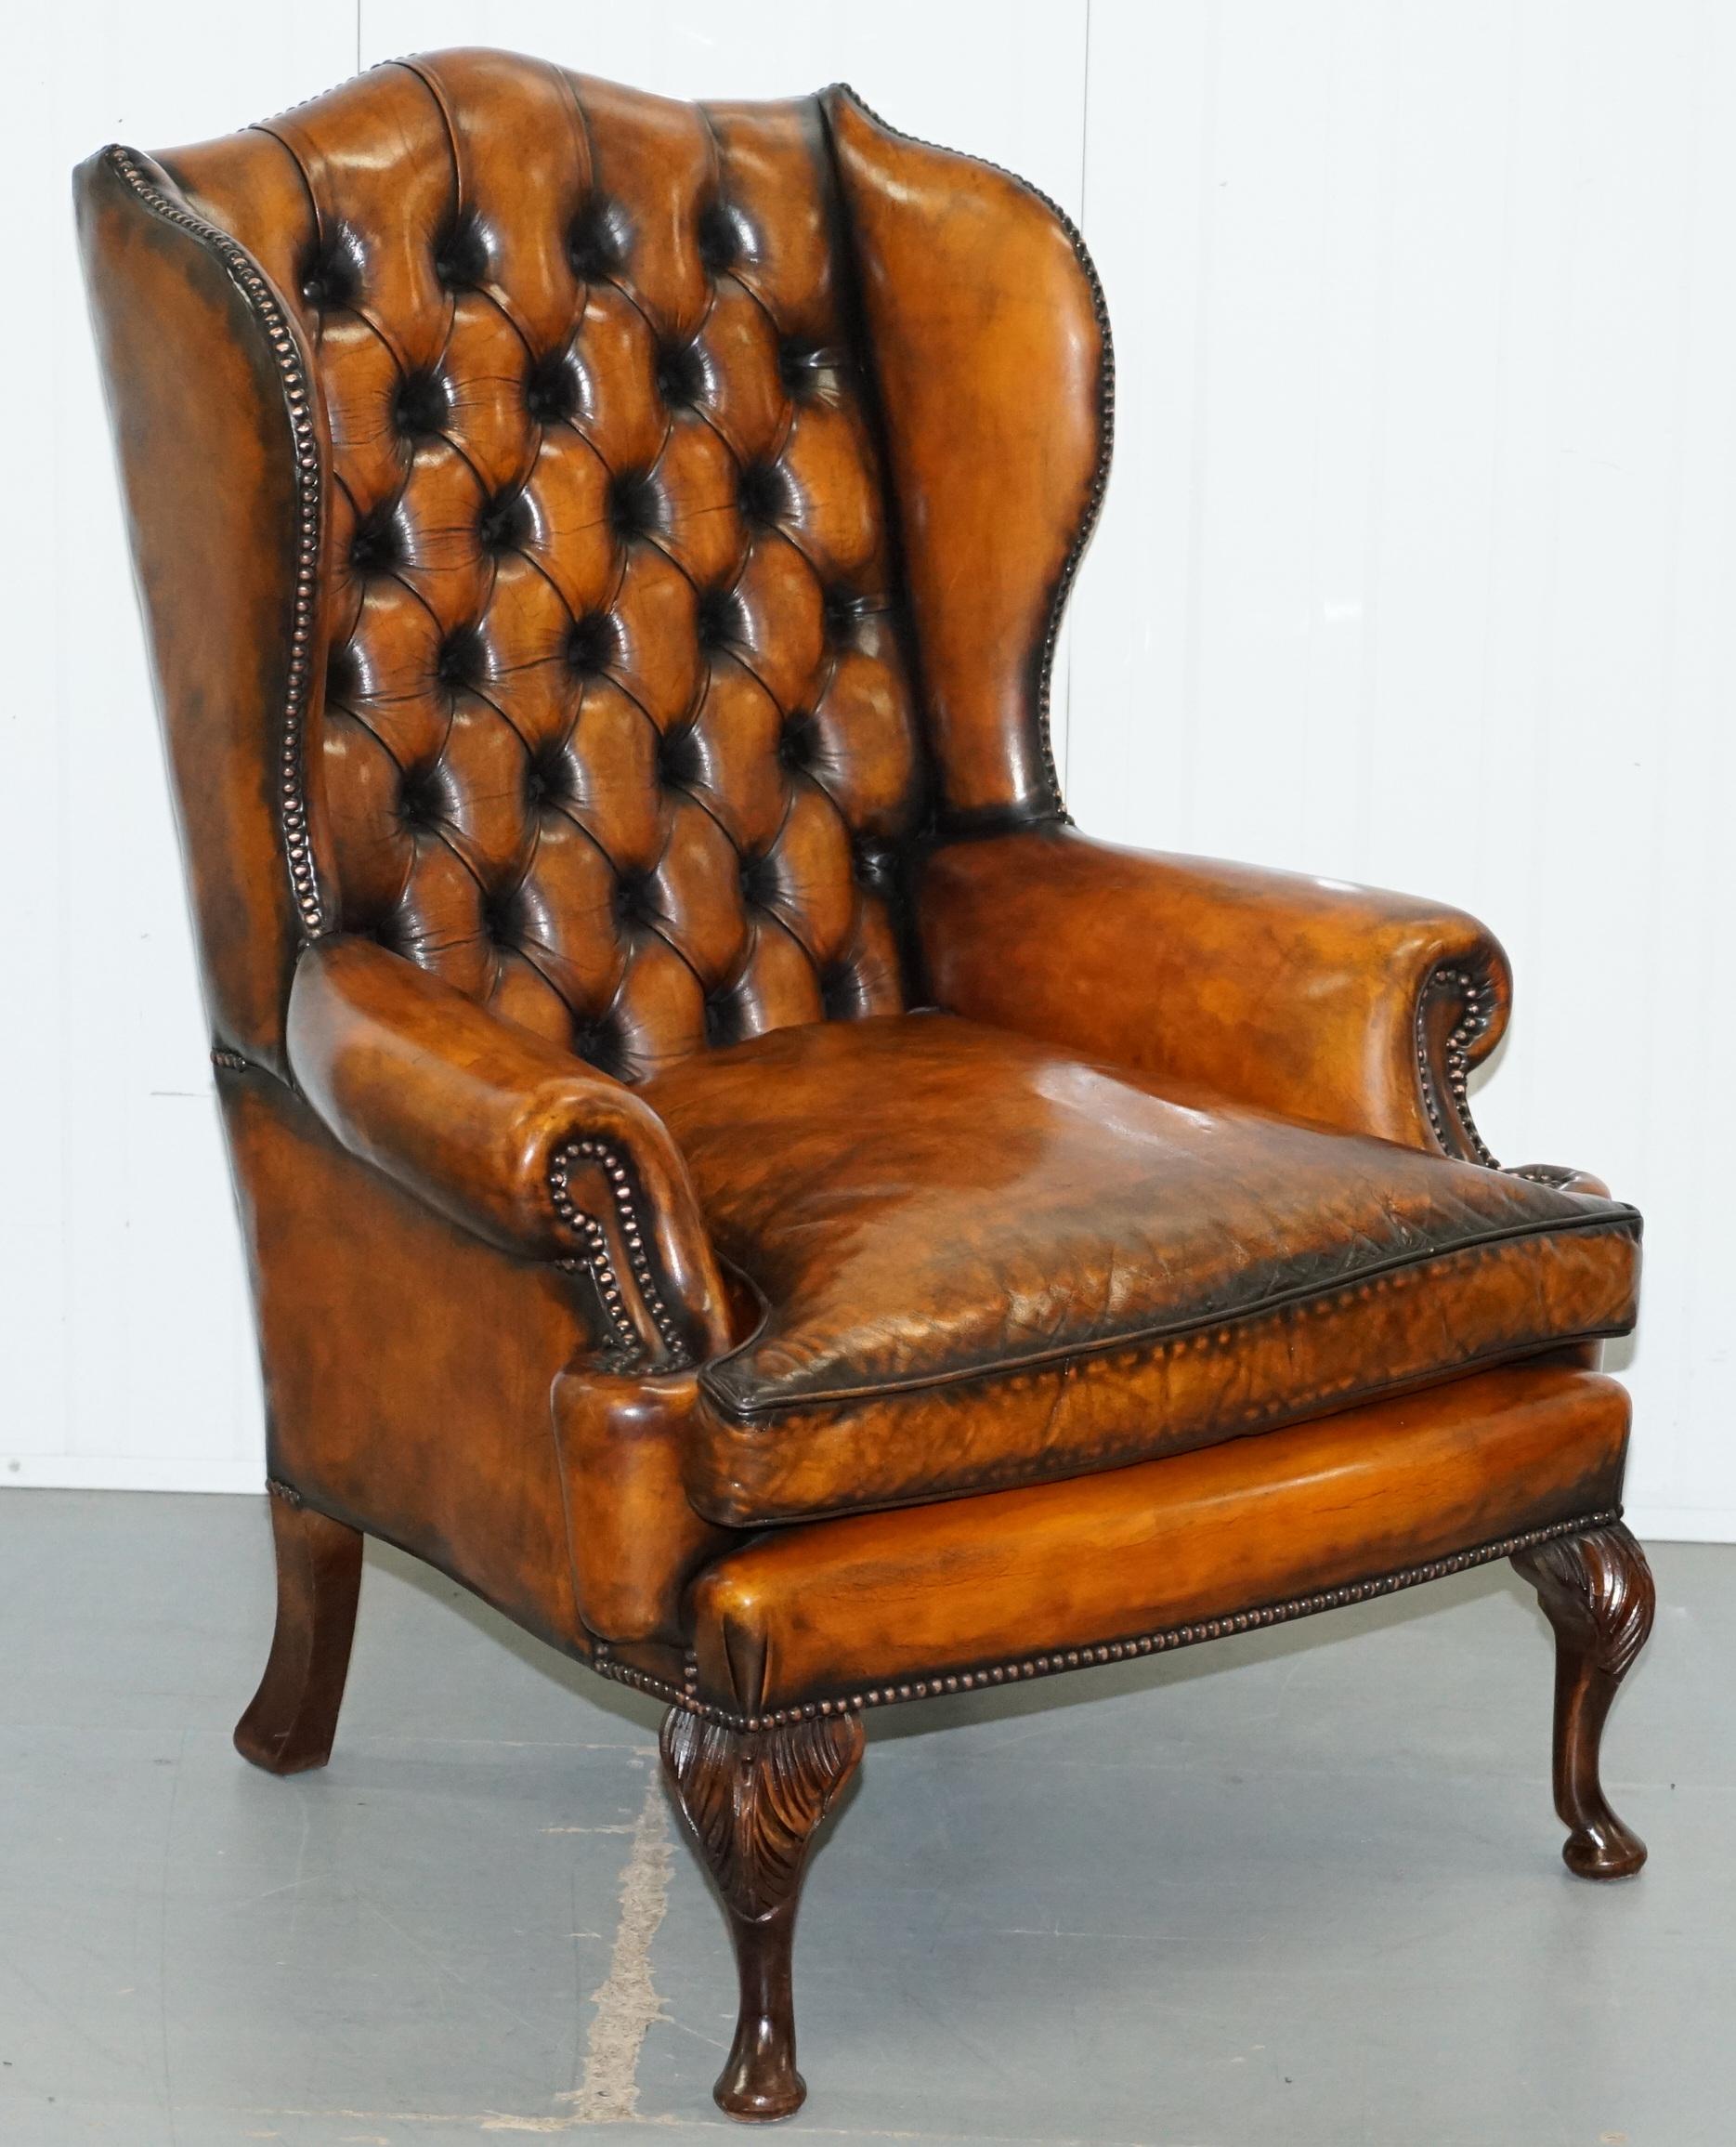 We are delighted to offer for sale this stunning pair of fully restored William Morris style Victorian wingback armchairs in hand dyed whisky brown leather with matching footstool

If you’re looking for a very rare model pair of wingback armchairs